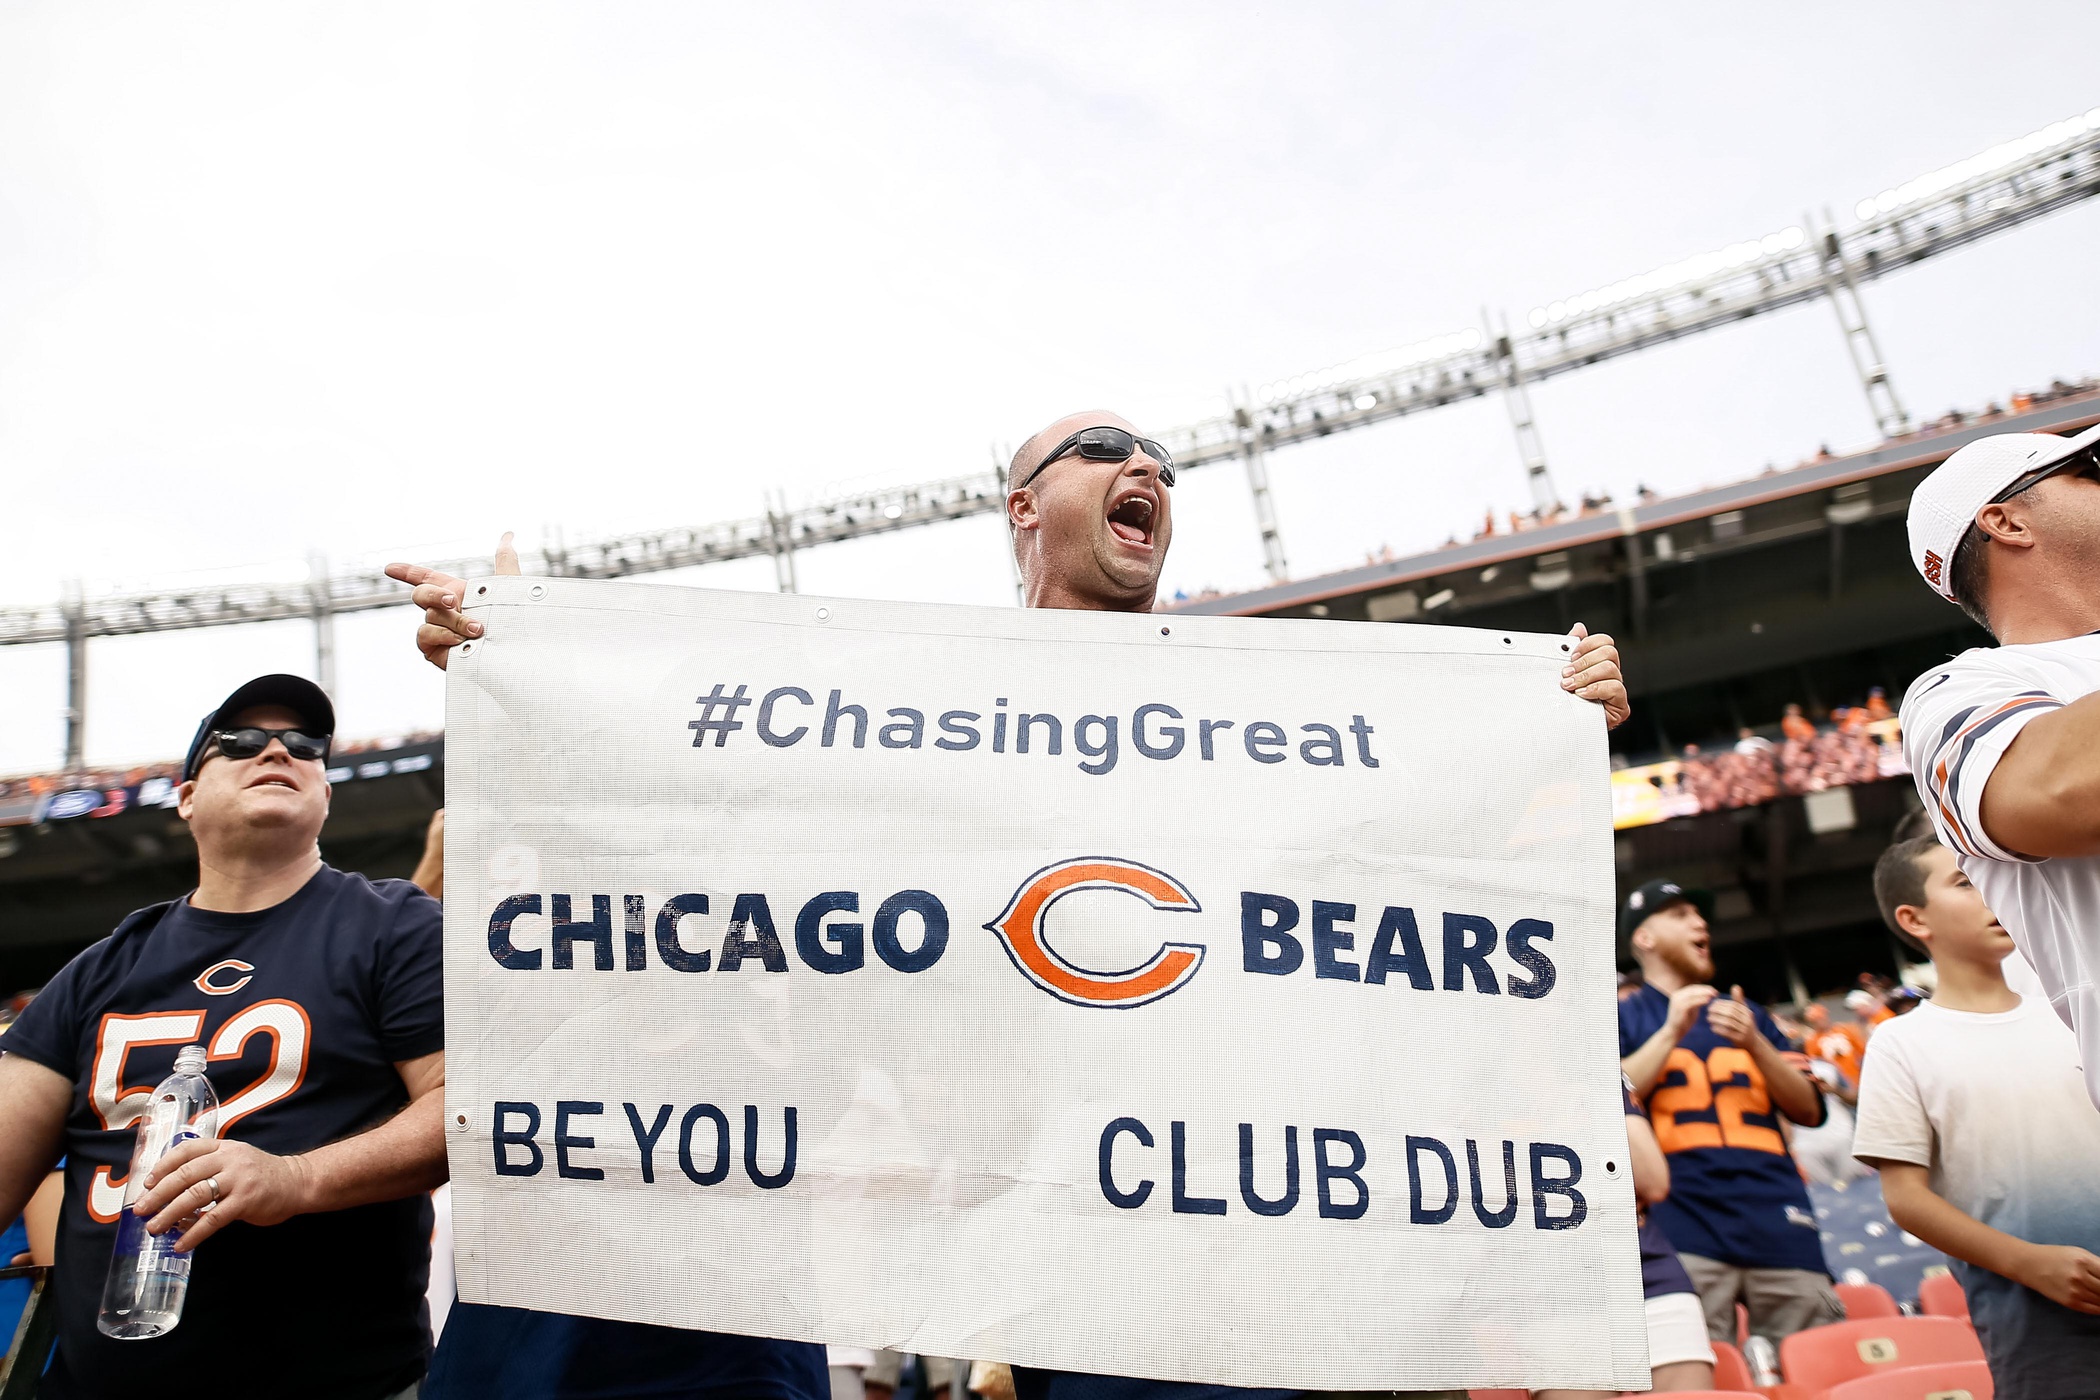 Chicago Bears Ticket Prices Are Projected To Increase By HOW Much?